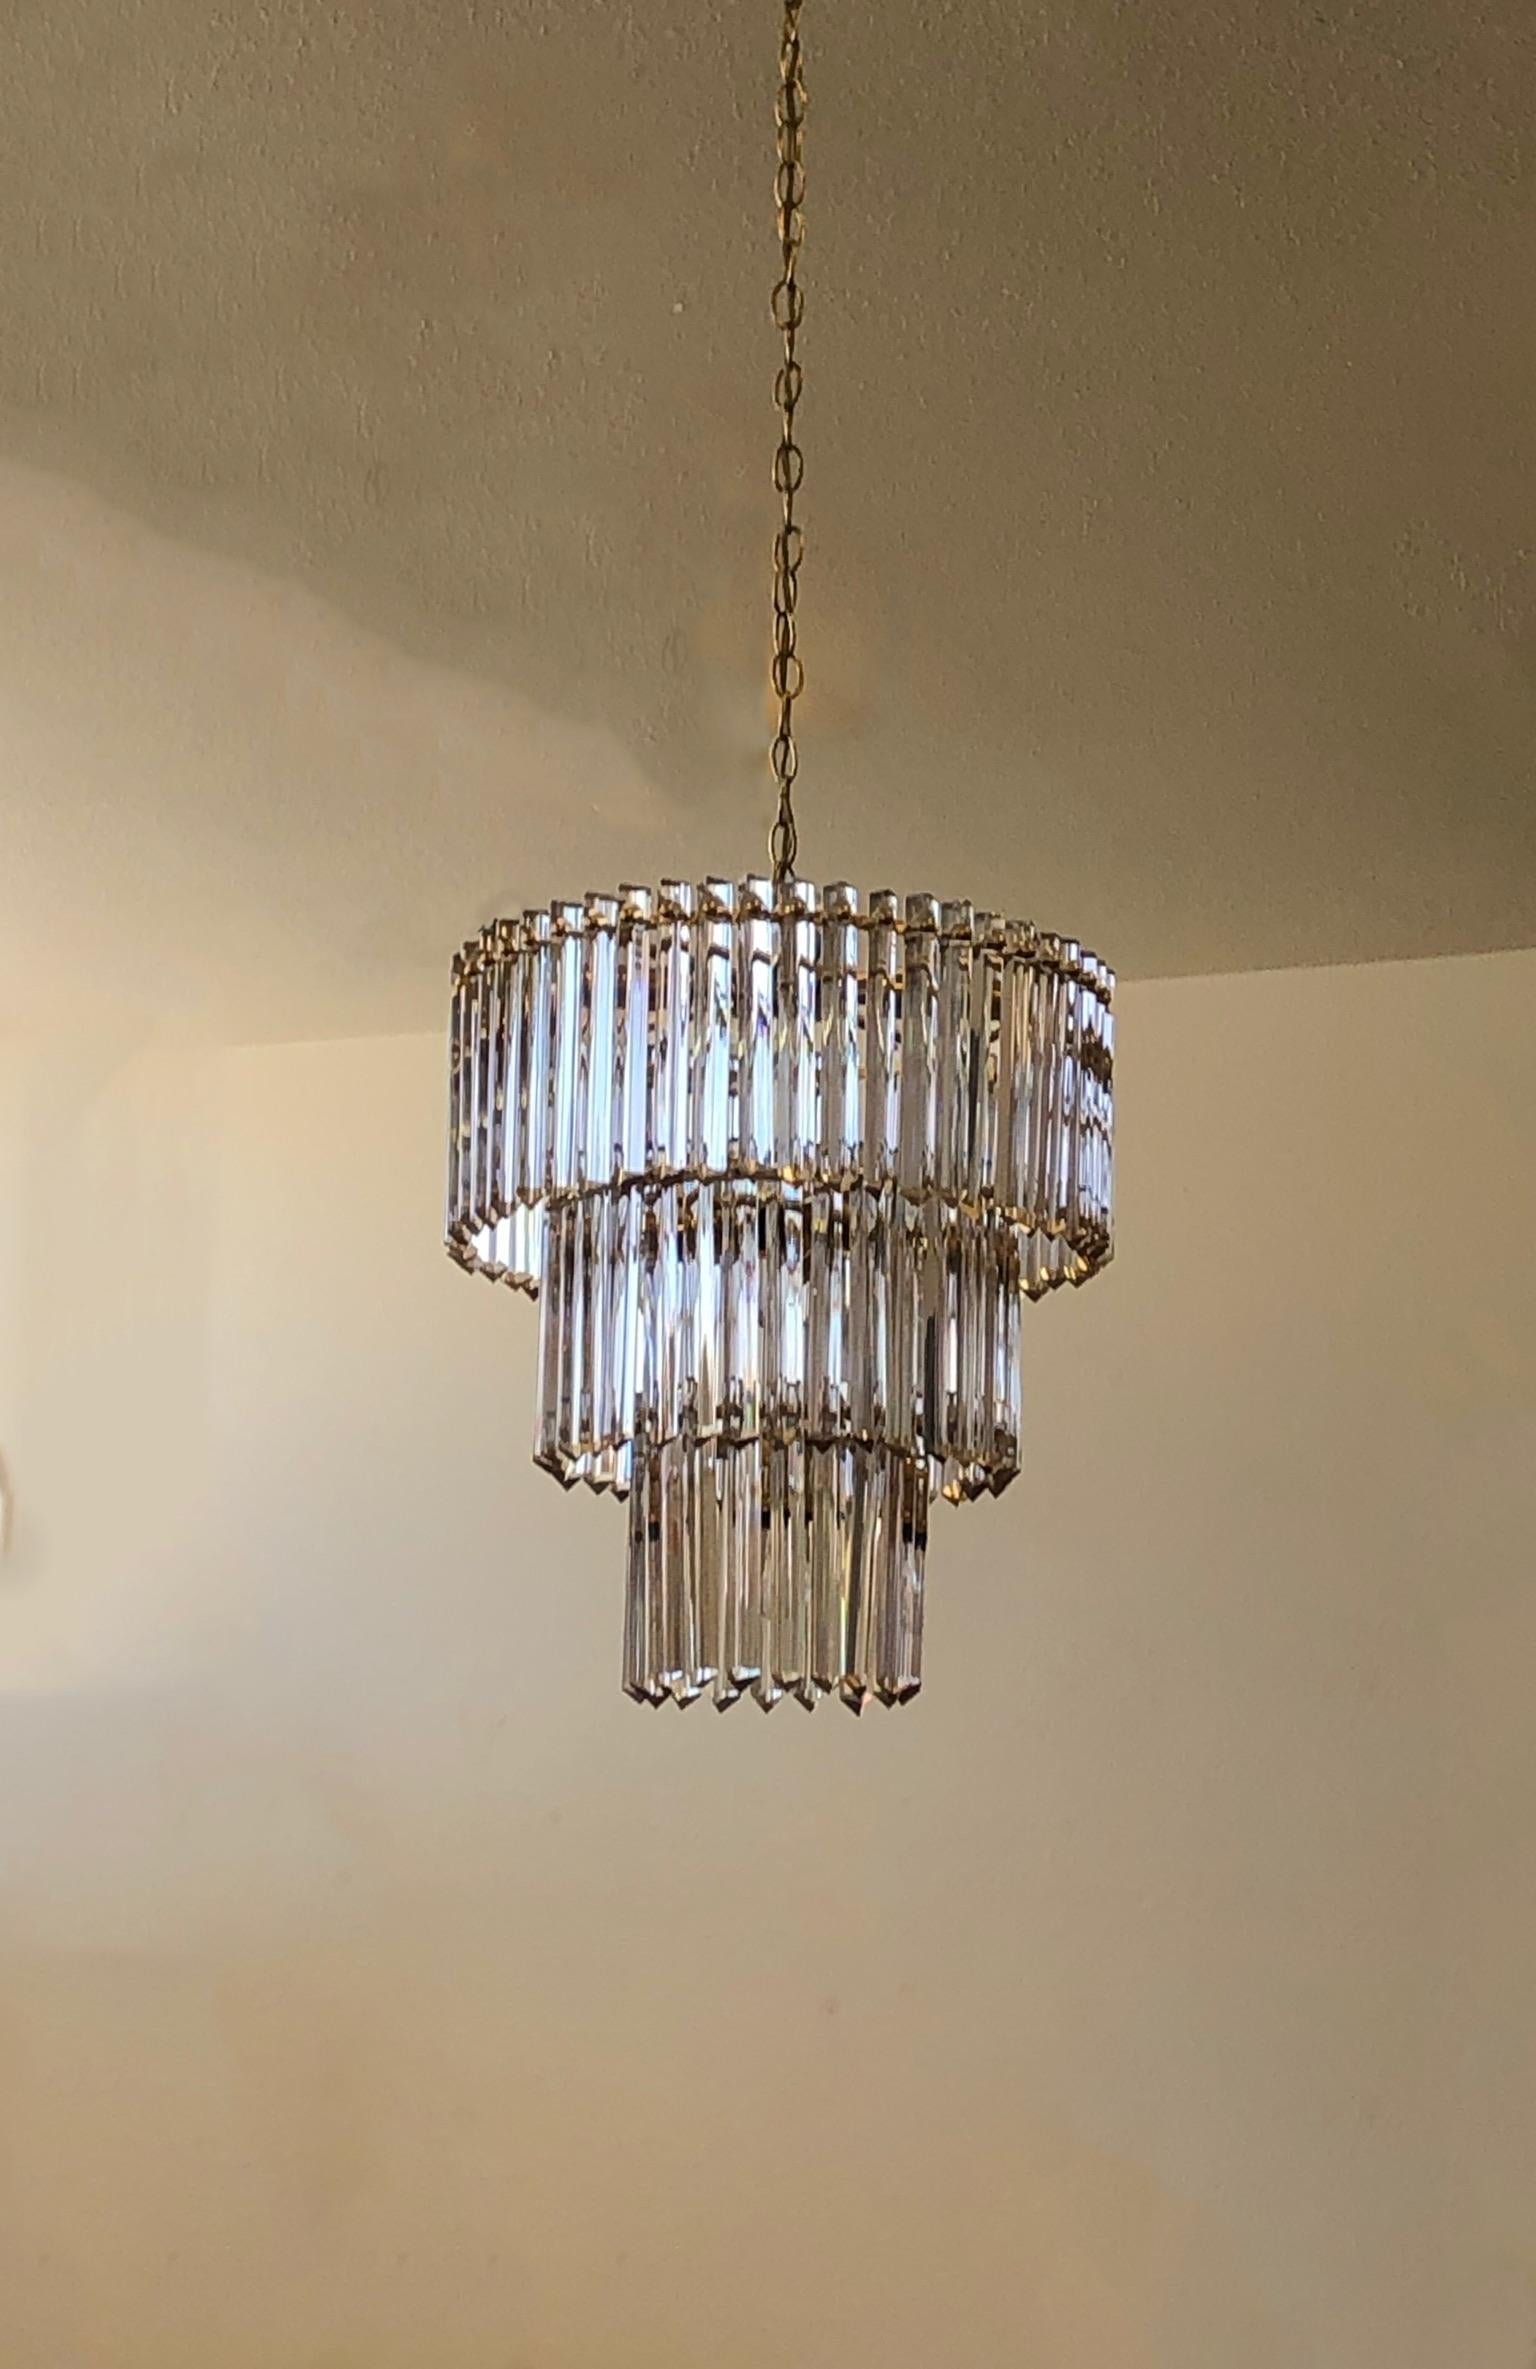 Three tiered clear crystals and polish brass chandelier from the 1970’s.
Shows minor wear consistent with age. 
Takes eight candelabra size bulbs and one regular Edison lightbulb. 
Ceiling cap included, we can make the chain any length you want.